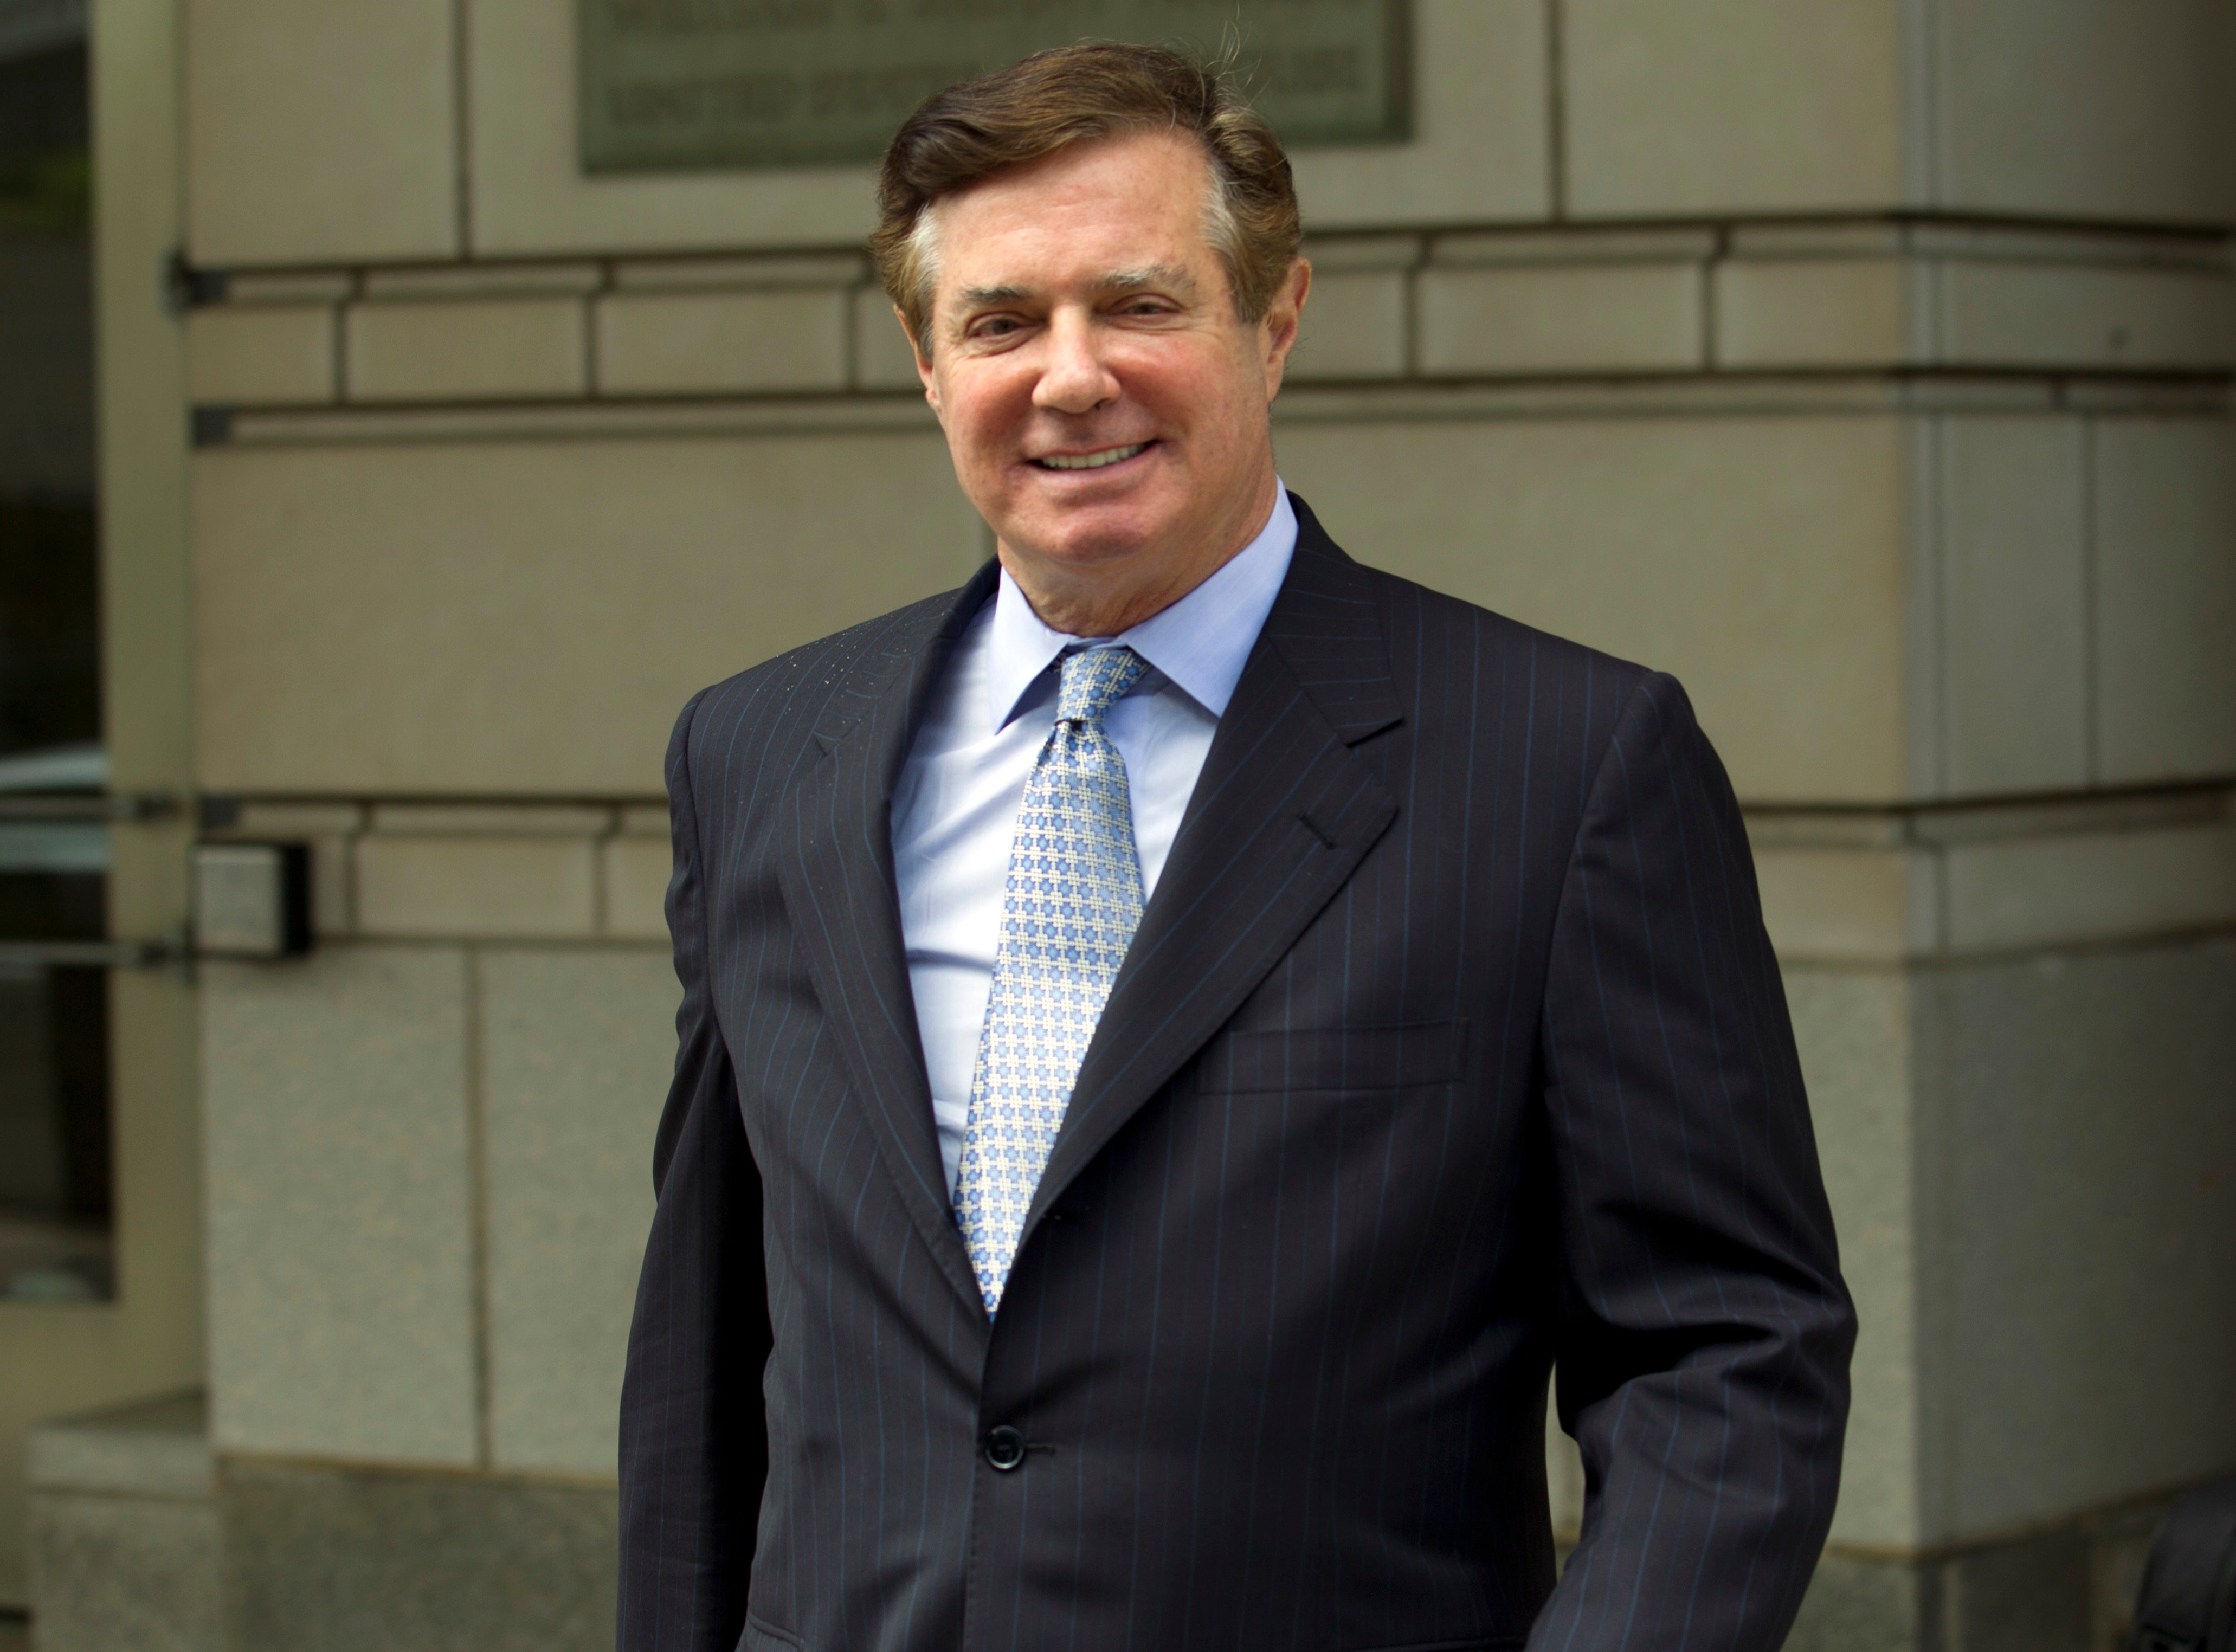 Paul Manafort, who chaired the Trump presidential campaign from June to August 2016, has left his RNC role this weekend